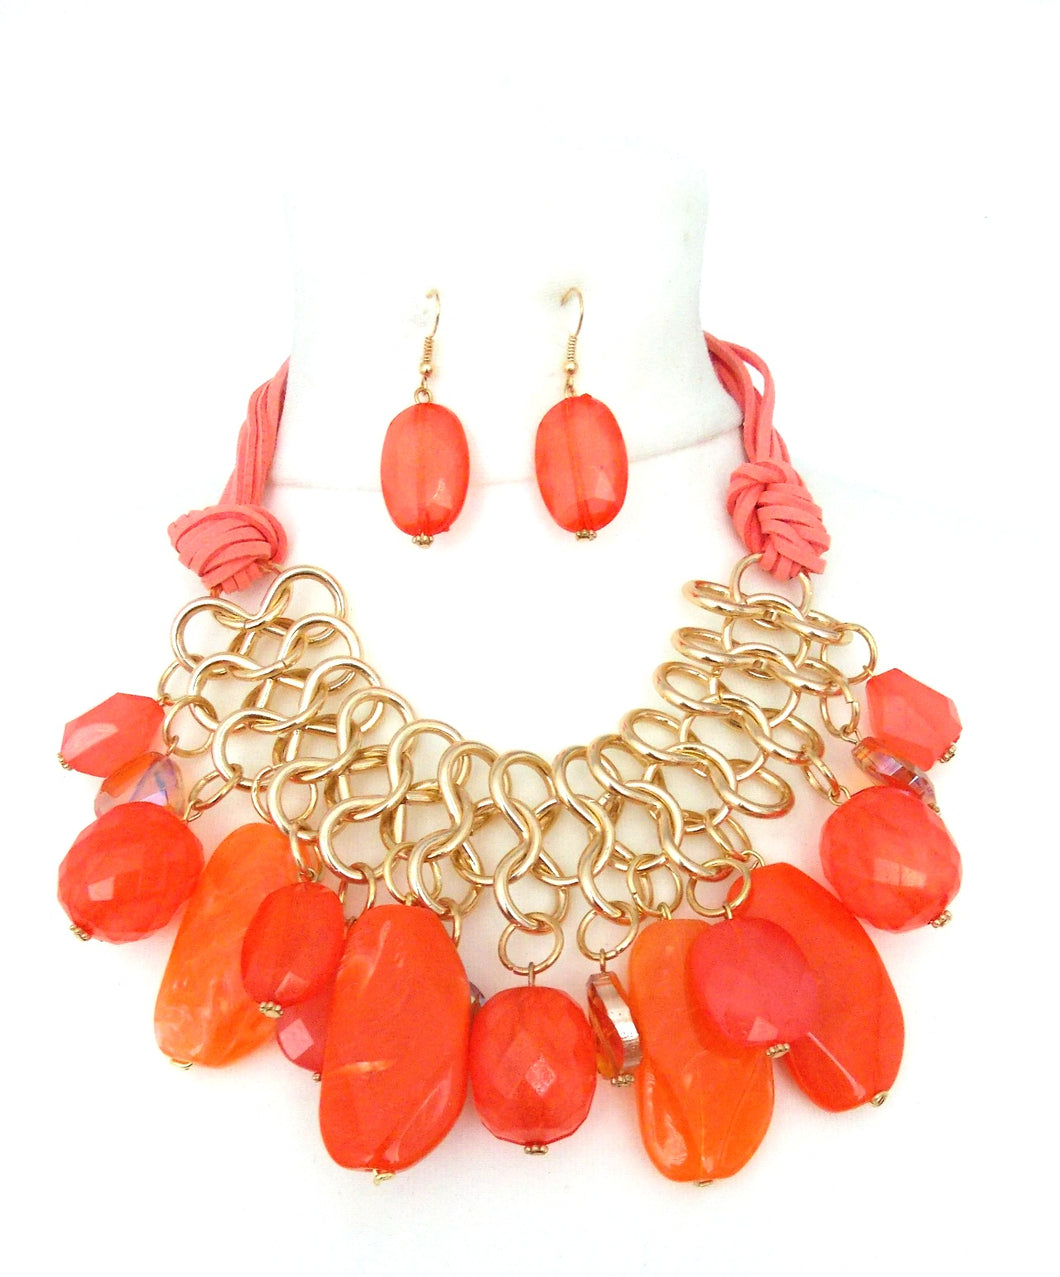 Chunky Orange Bead Necklace and Earrings Set